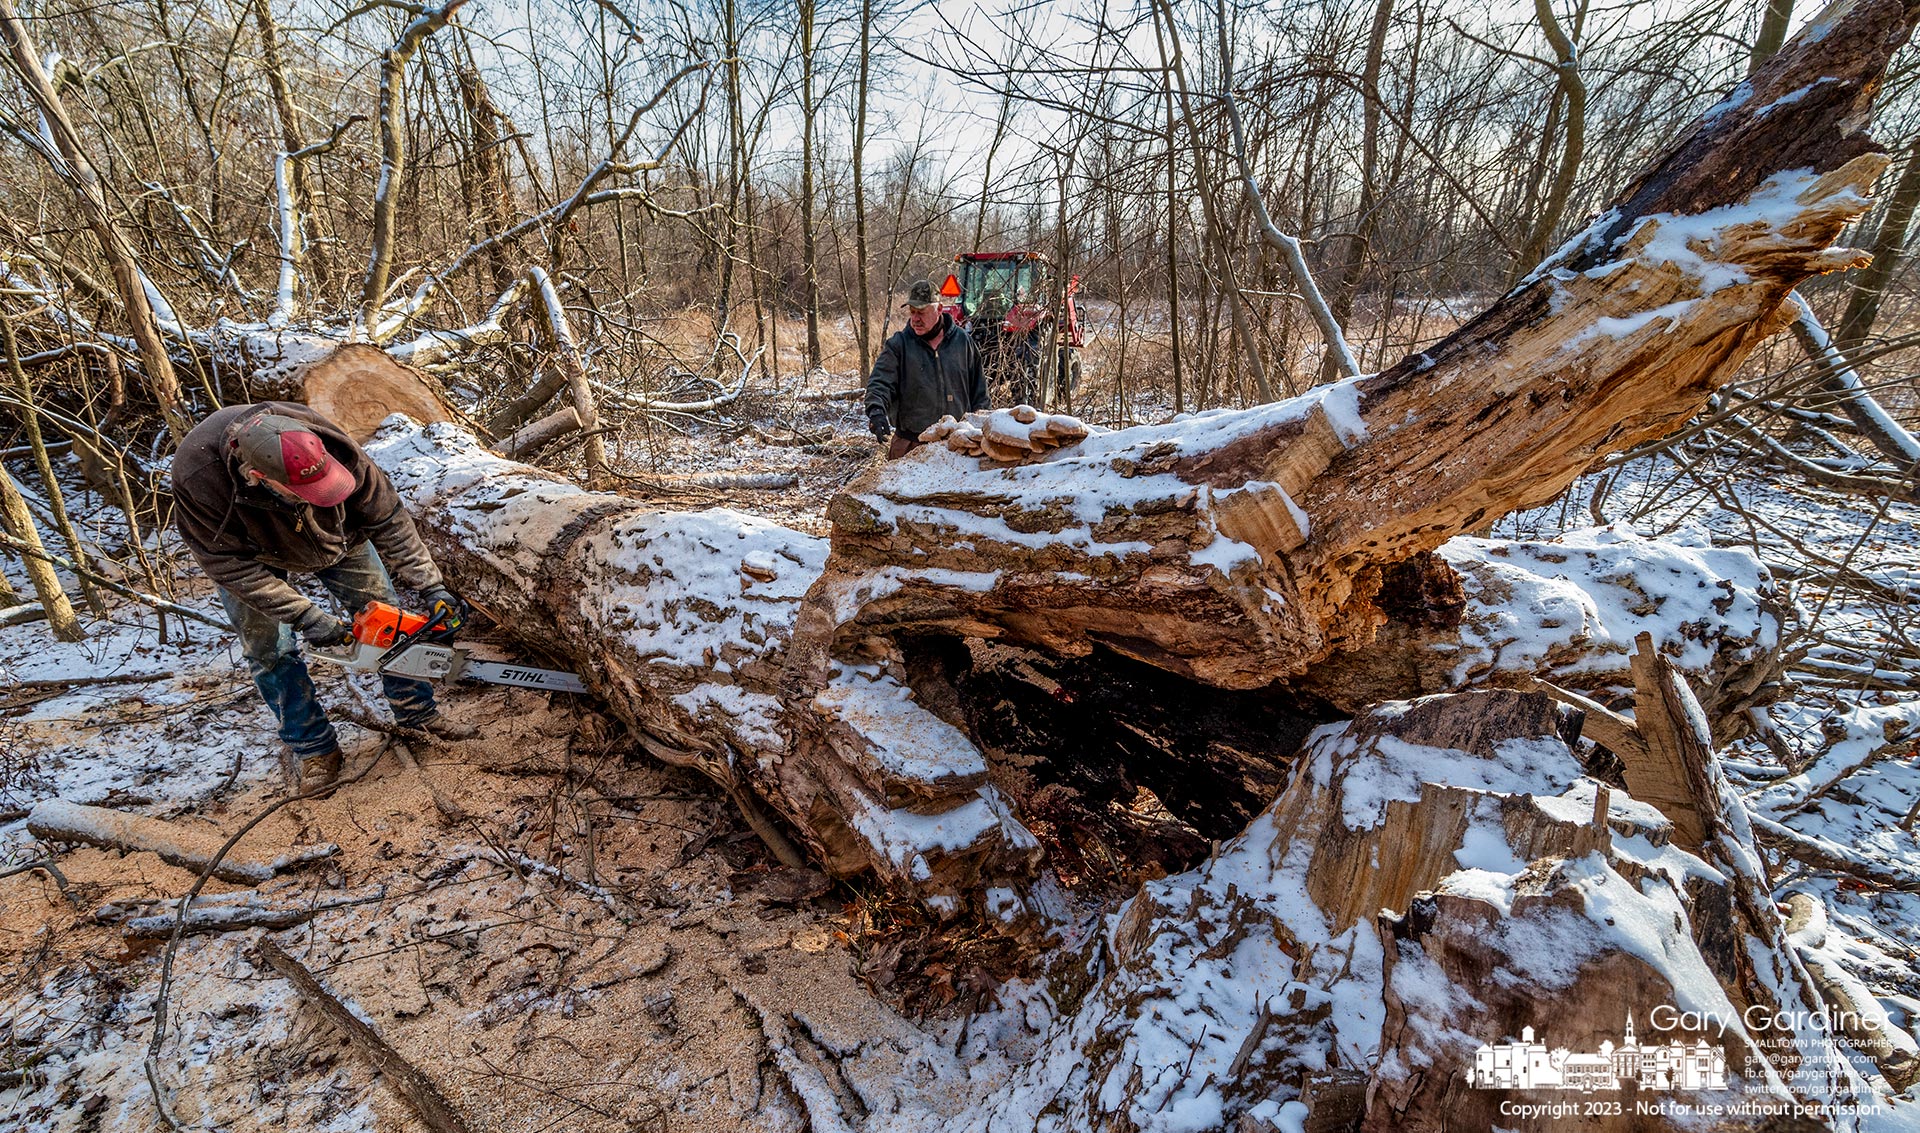 Rodney and Kevin cut a fallen tree into sections small enough to be split into firewood from a field on Africa Road that they help manage in Westerville. My Final Photo for January 31, 2023.